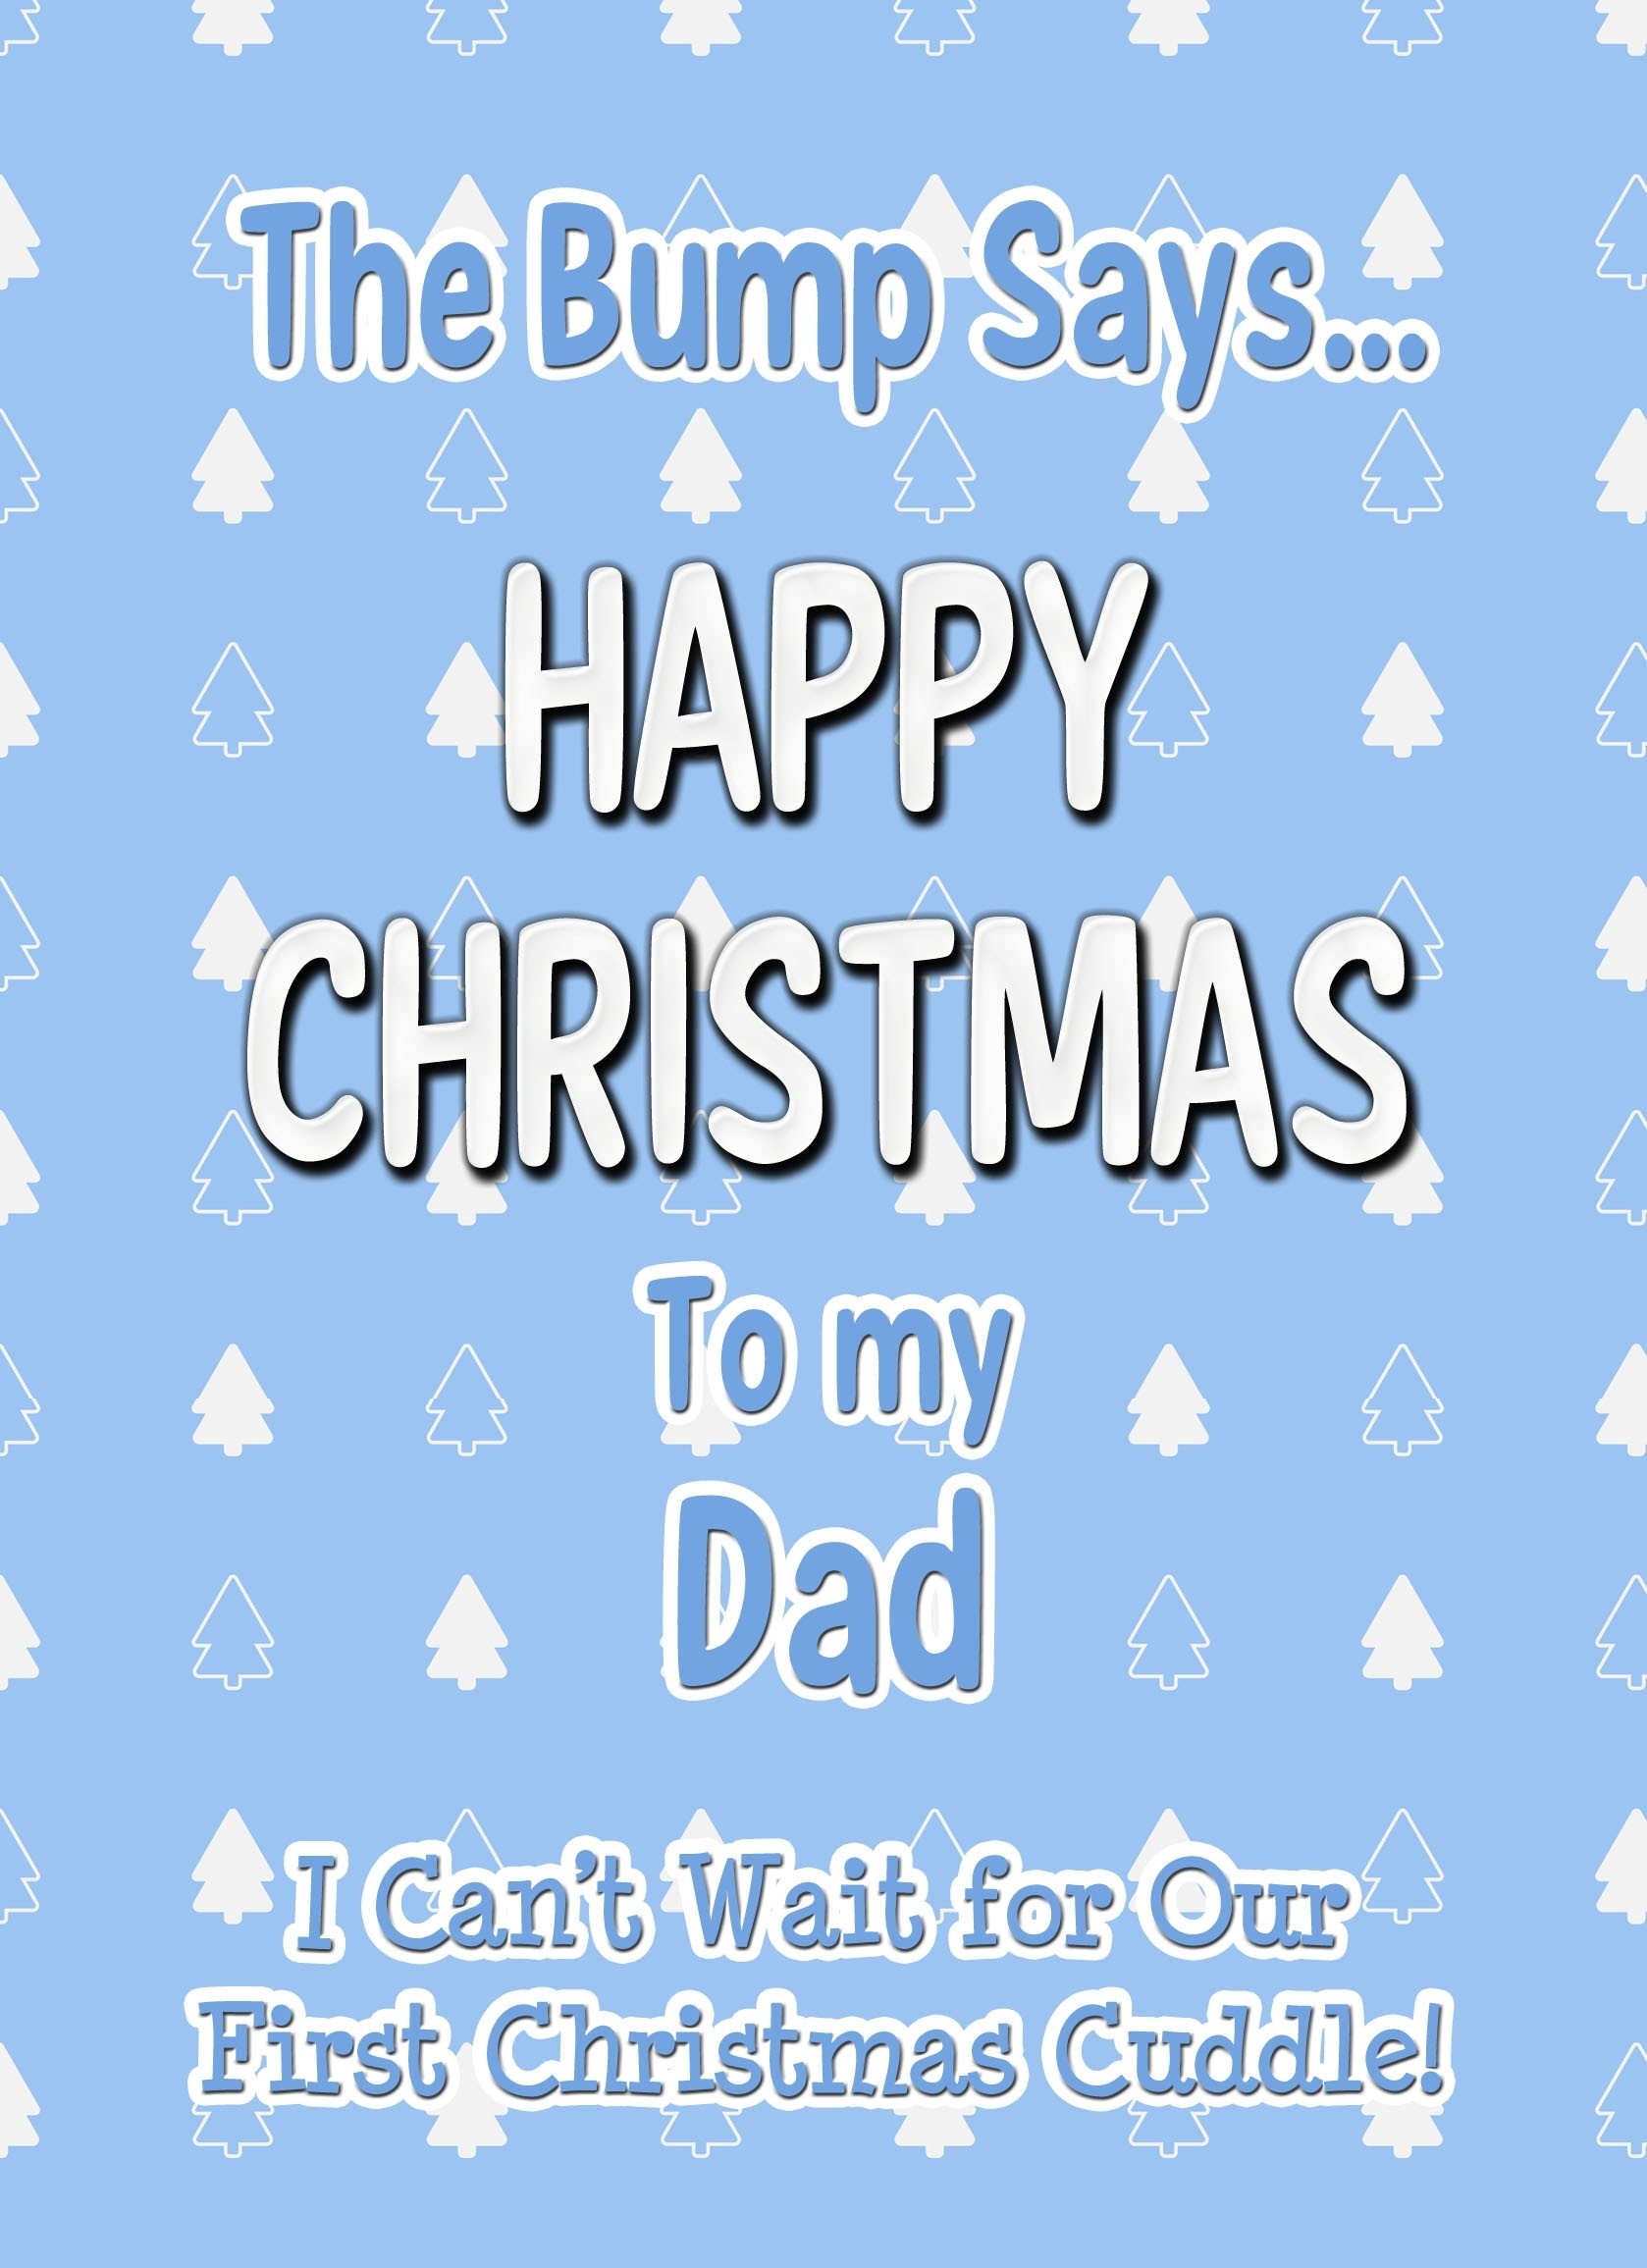 From The Bump Pregnancy Christmas Card (Dad, Blue)